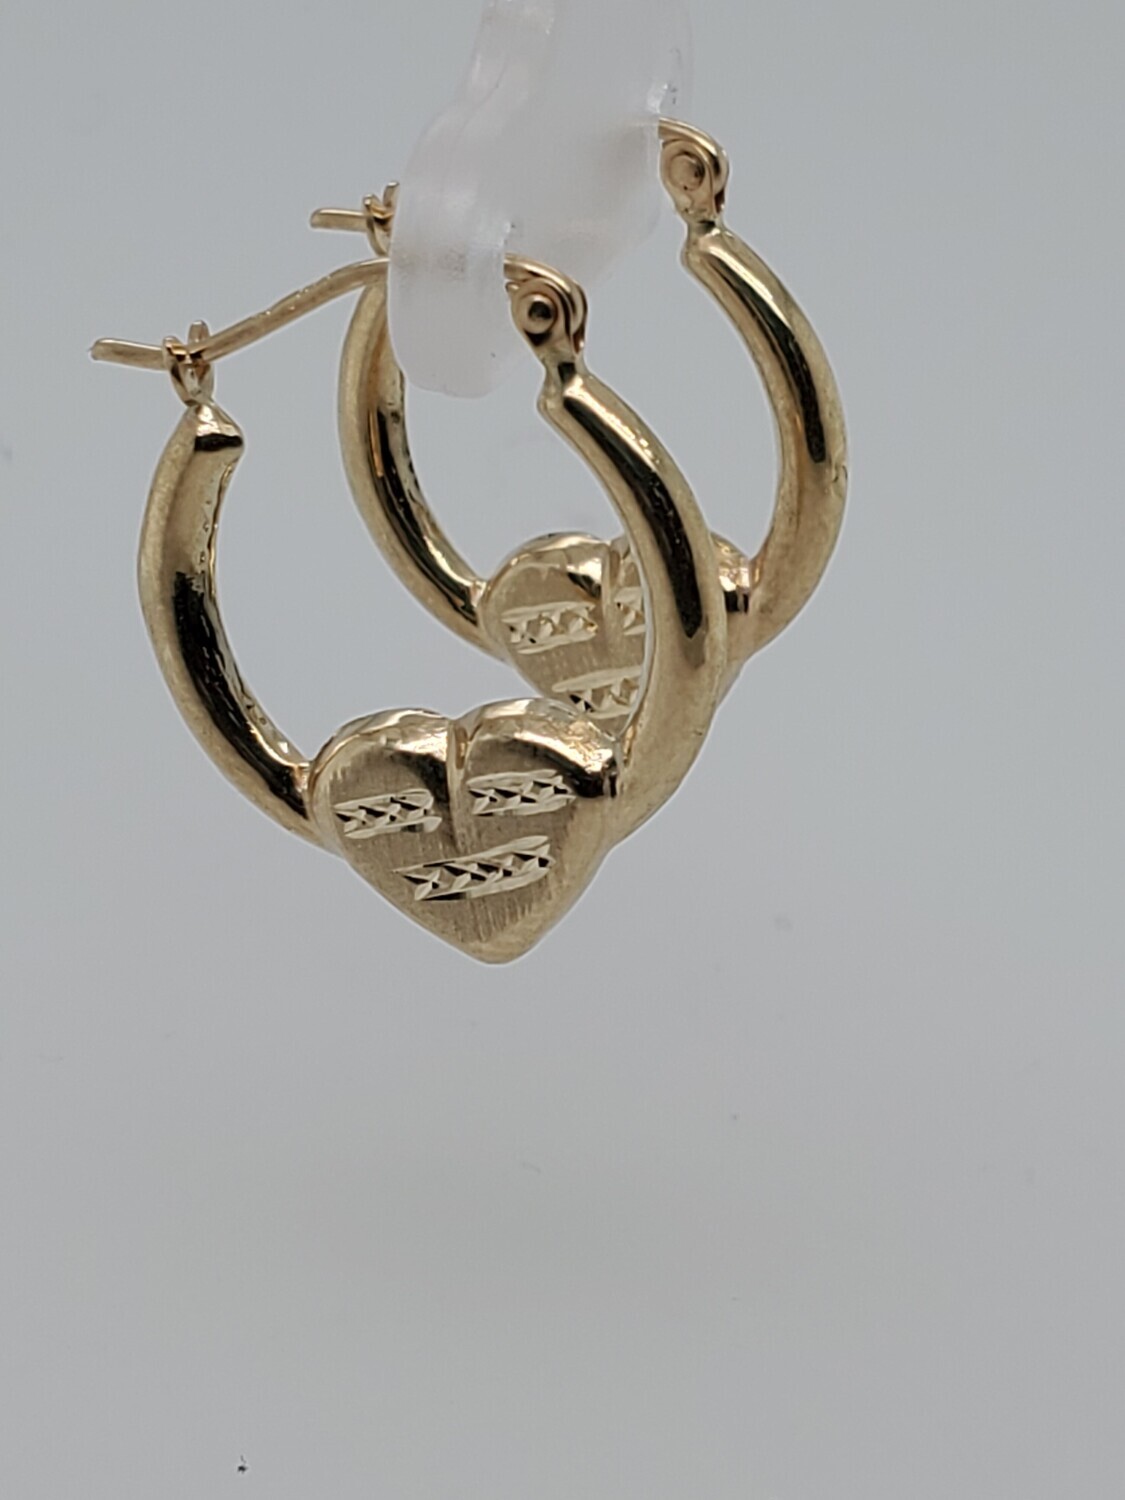 BRAND NEW!! 14KT HEART HOOP EARRINGS HOLLOW INVENTORY # I-18314 75TH AVE